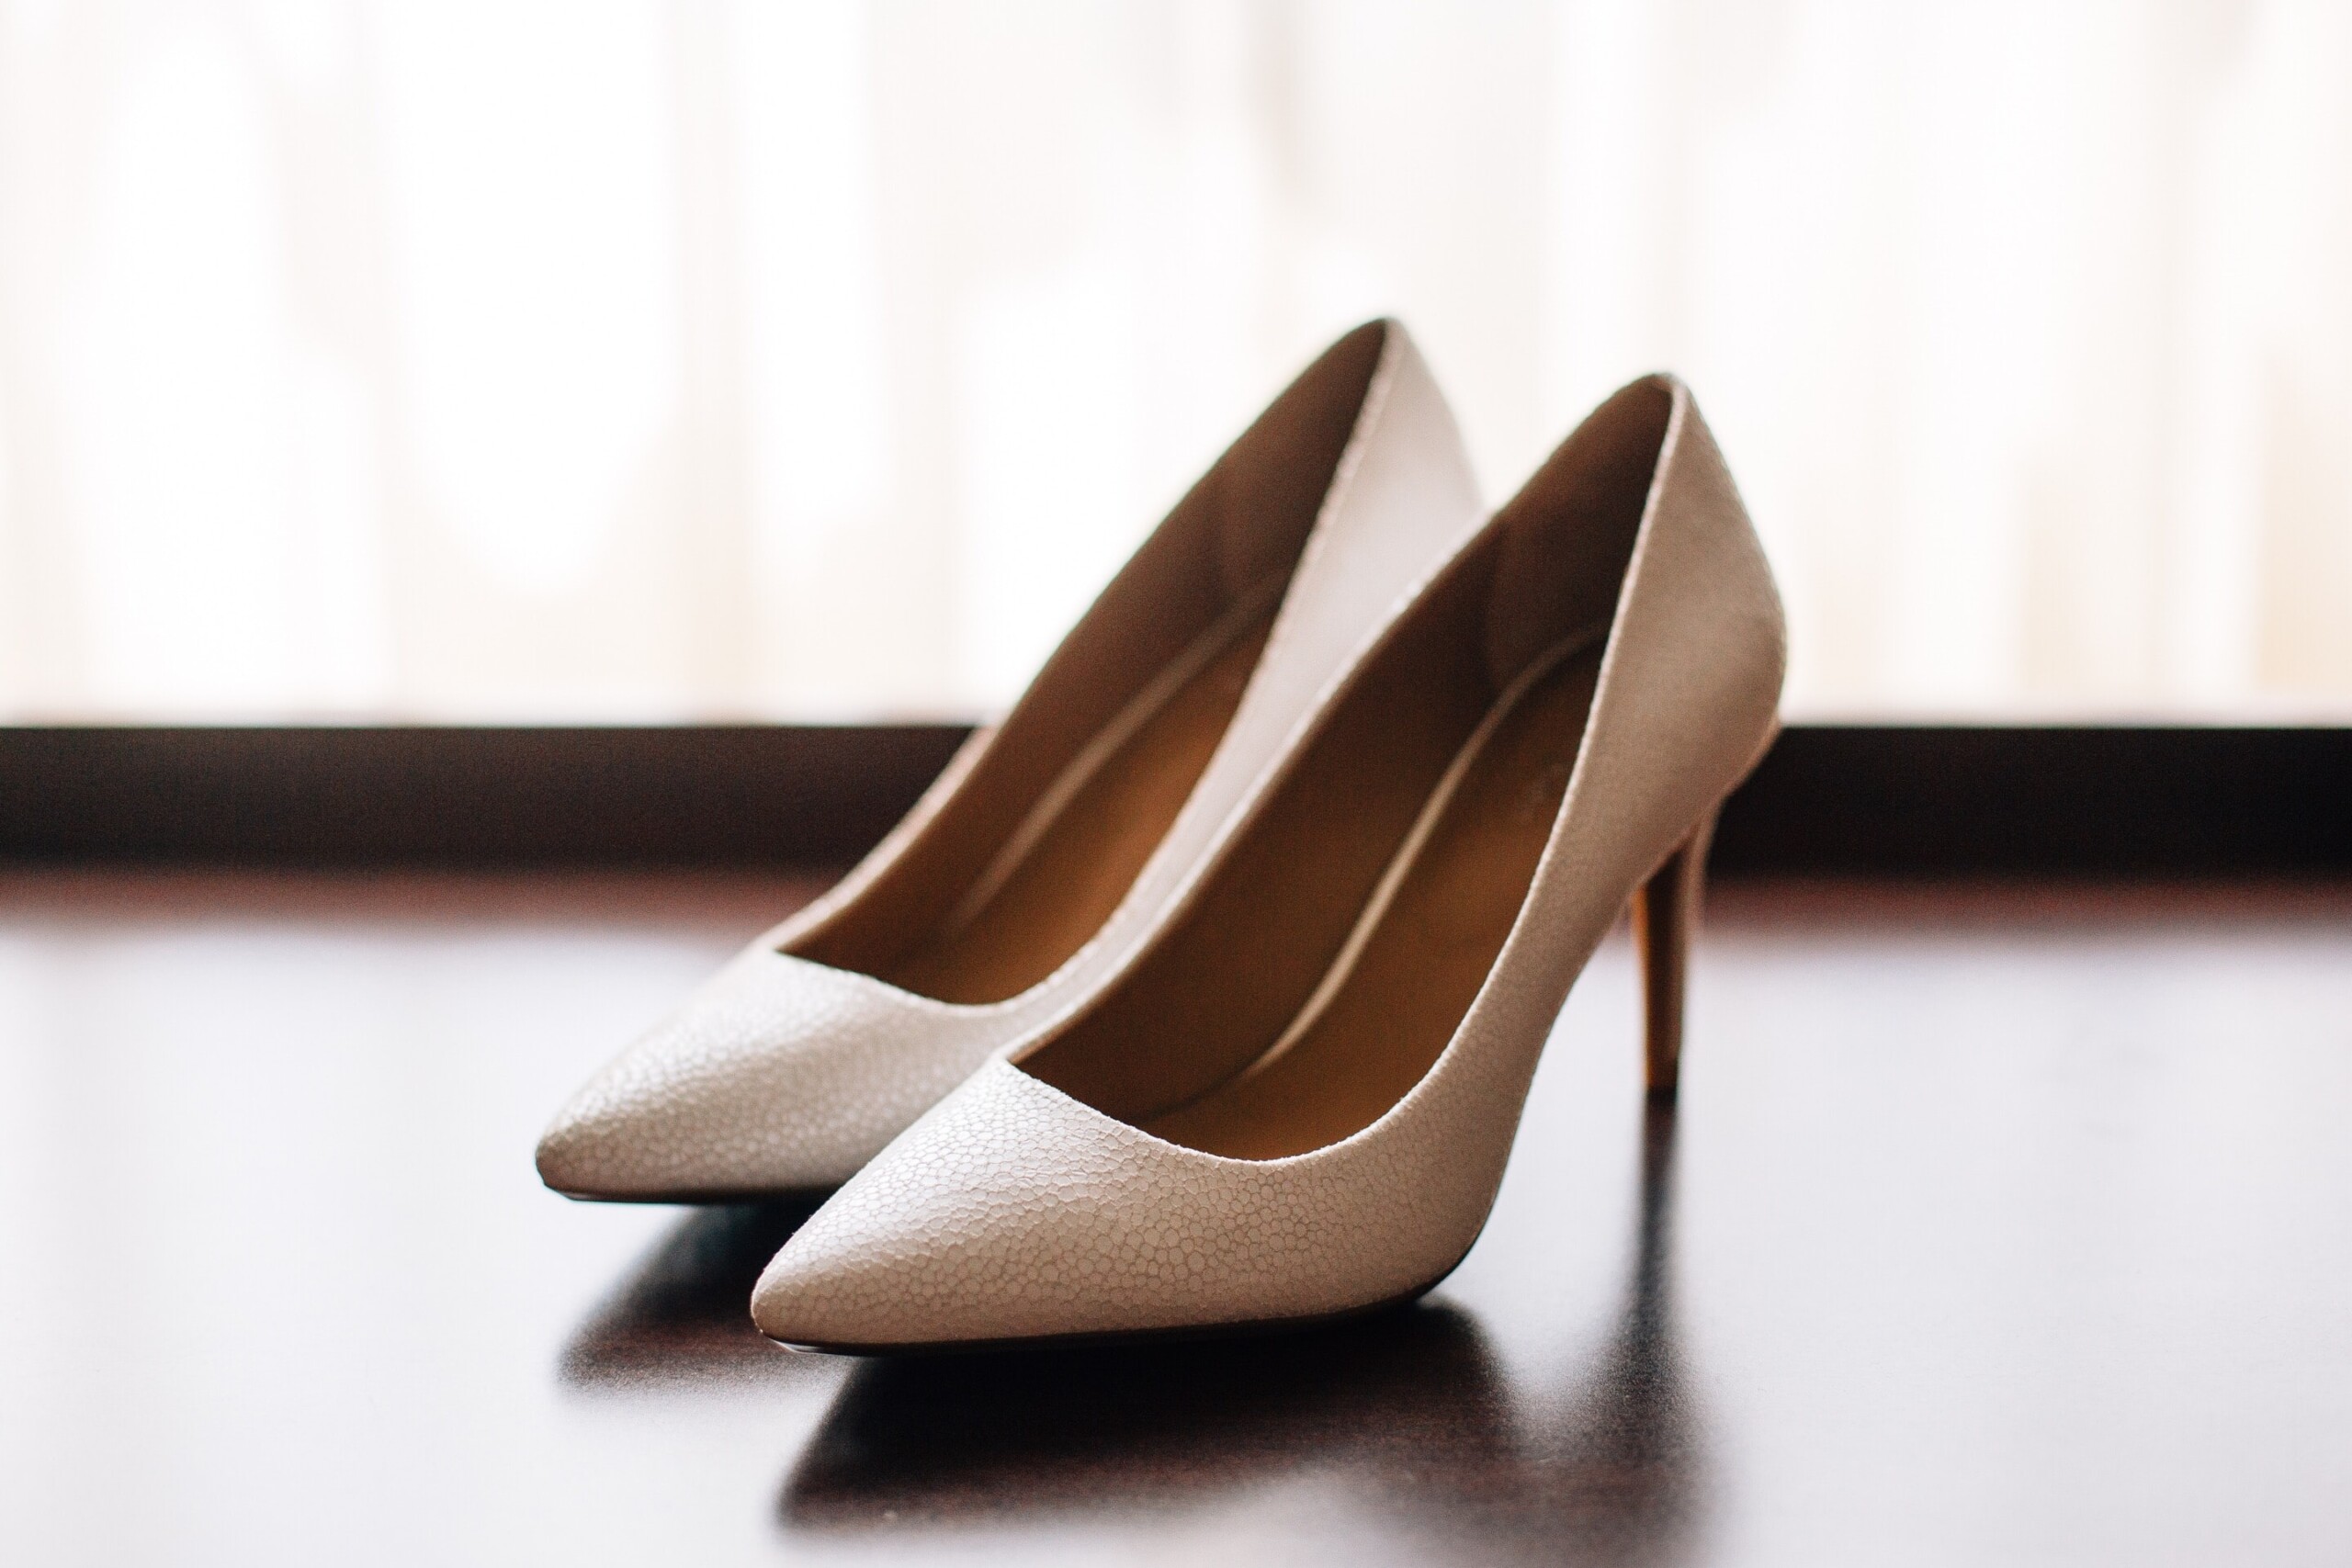 The Best Wedding Shoes for Brides